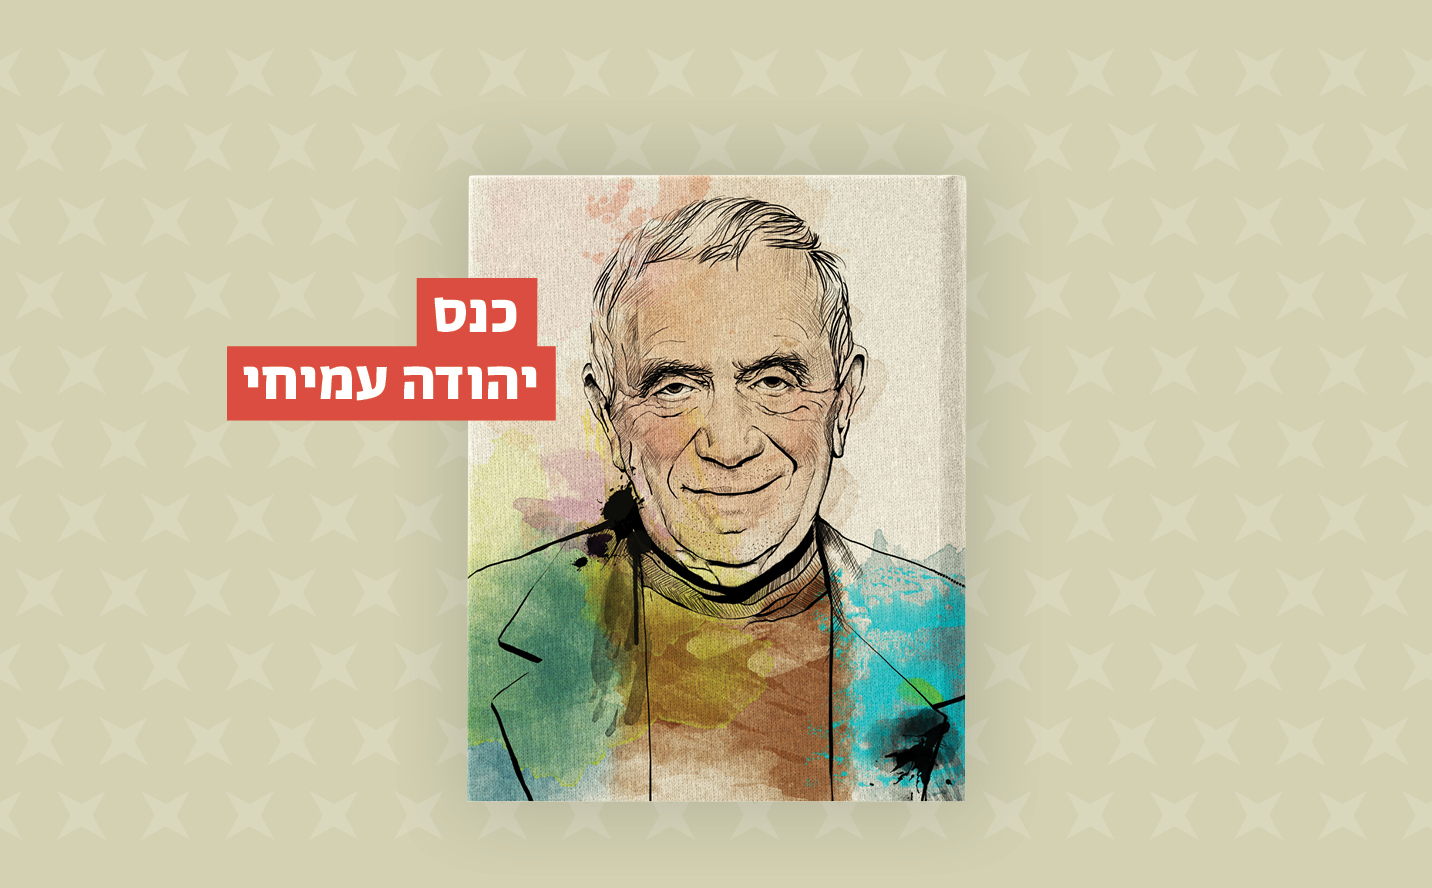 The Yehuda Amichai conference - Wednesday